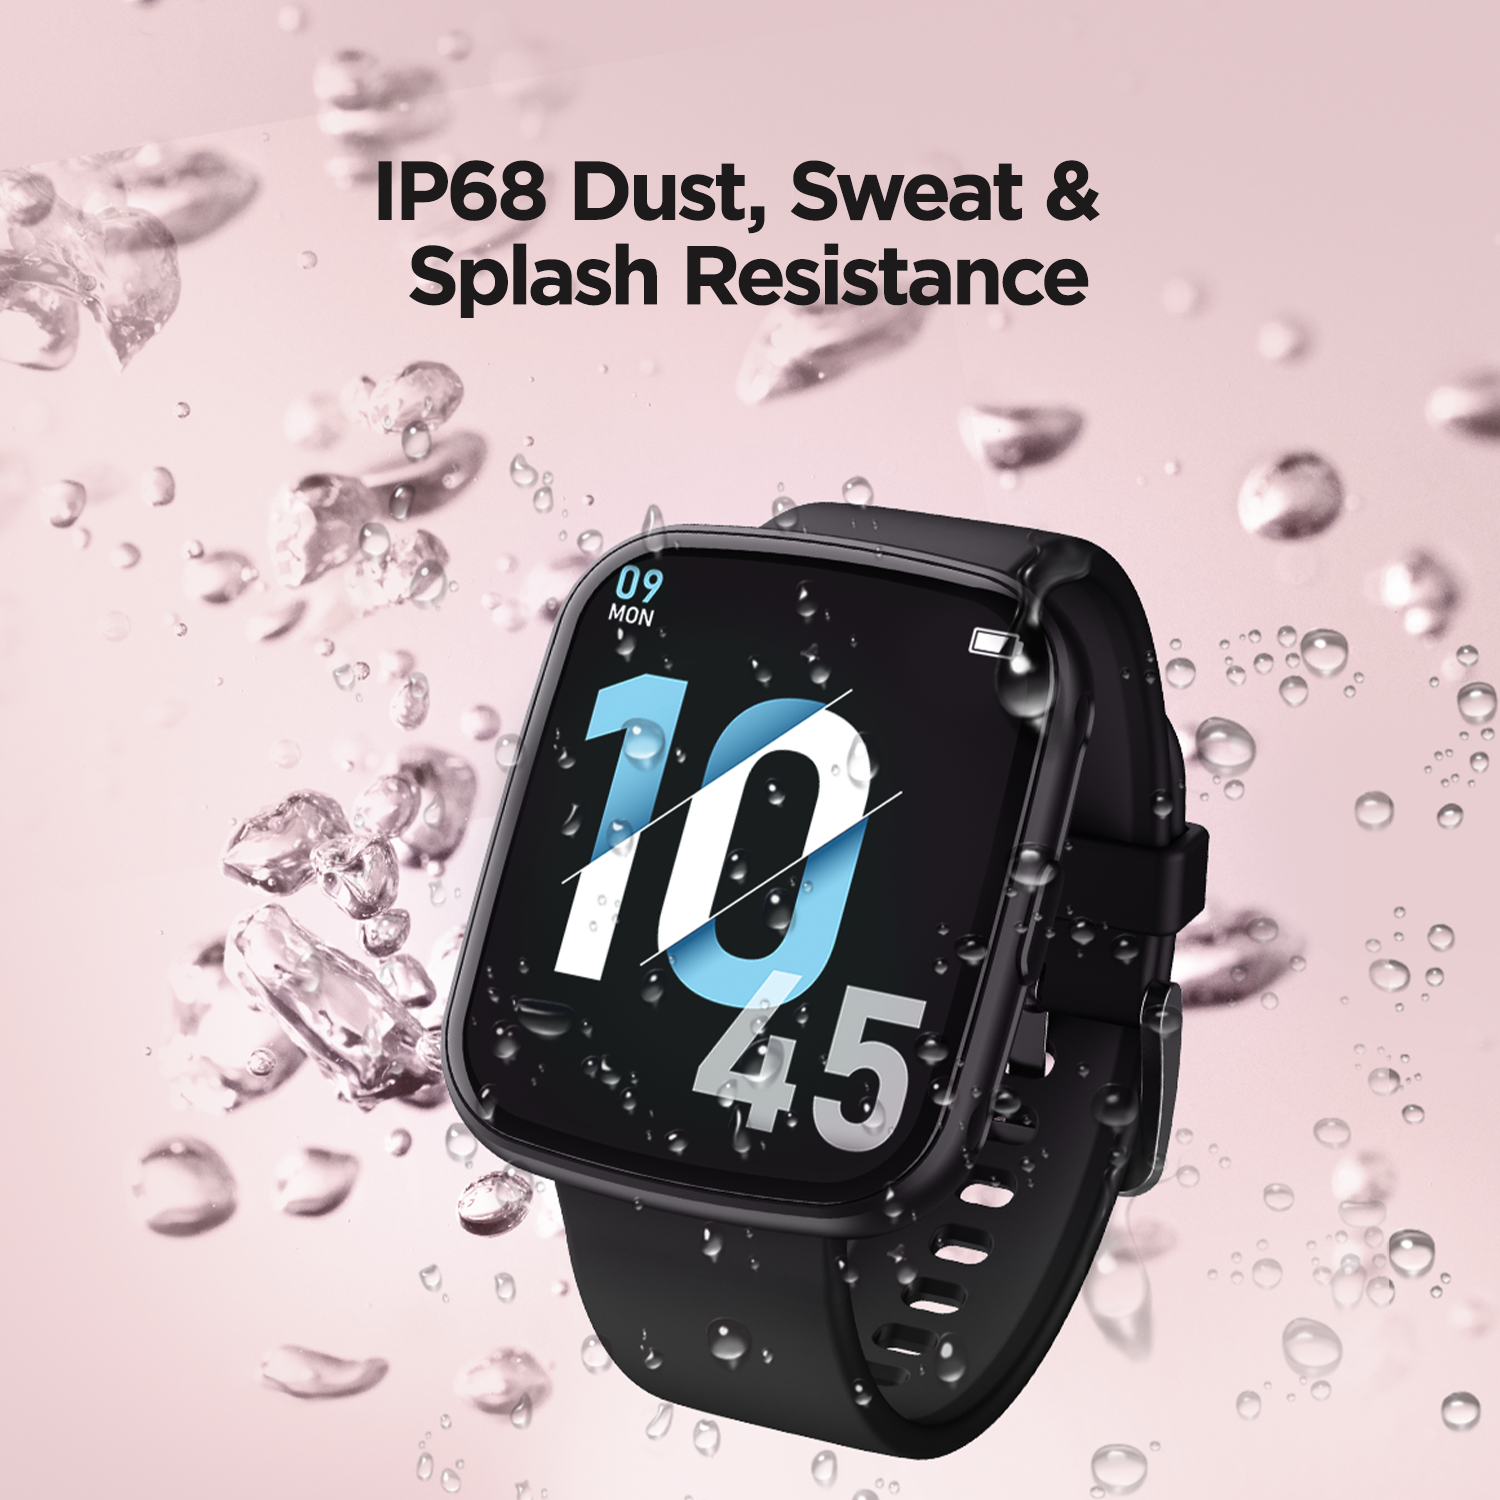 boAt Wave Play | Vivid 1.69 (4.29cm) HD Display Smartwatch with IP68 Dust  & Water Resistance, 10+ Sport Modes